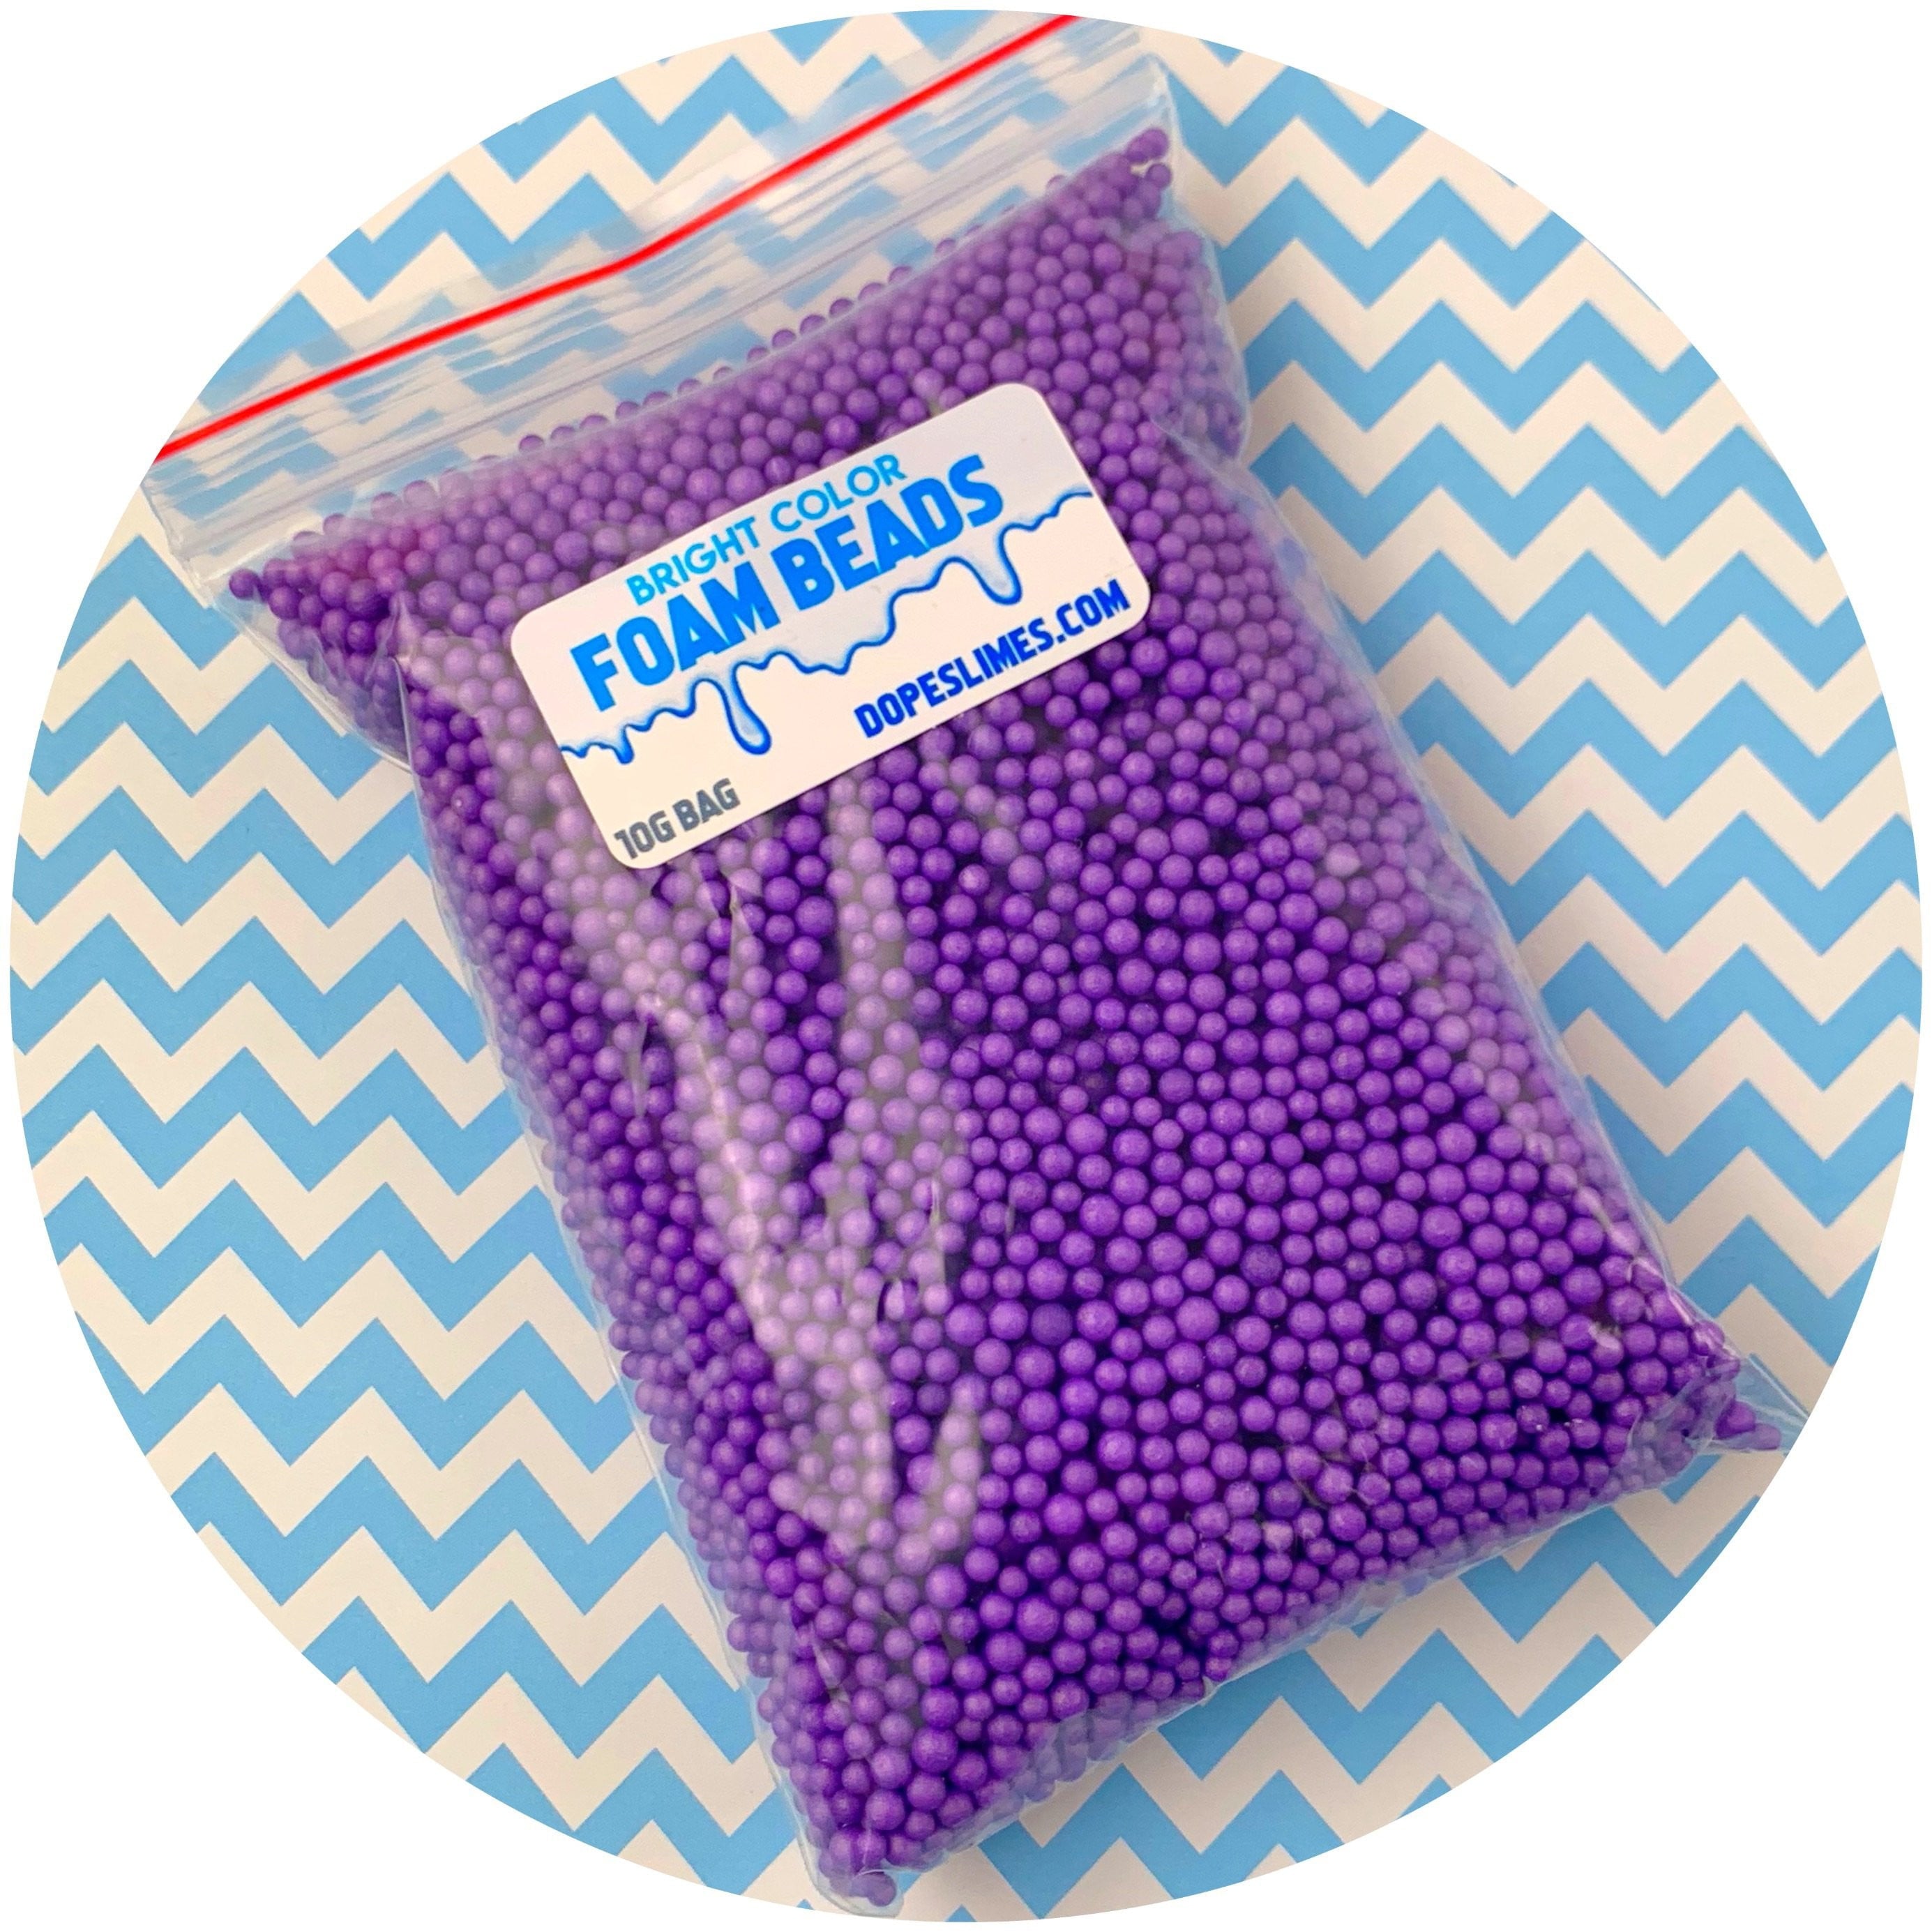 Small Bright Foam Beads - Buy Slime Supplies - Dope Slimes 